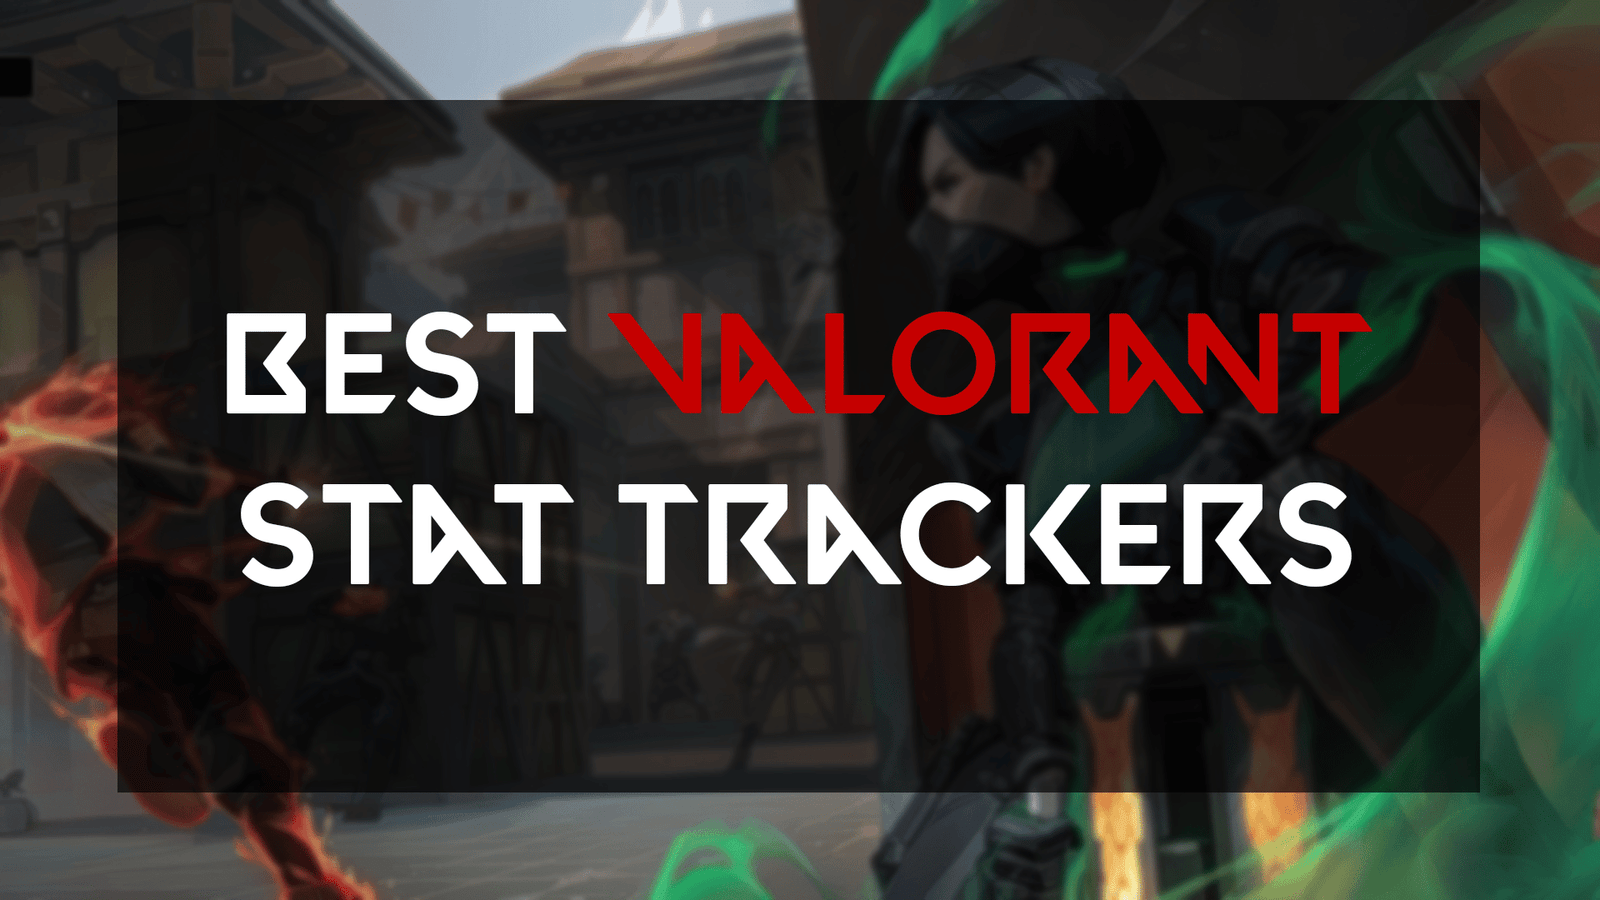 The Ultimate Valorant Stat Tracker Guide and Top Tips